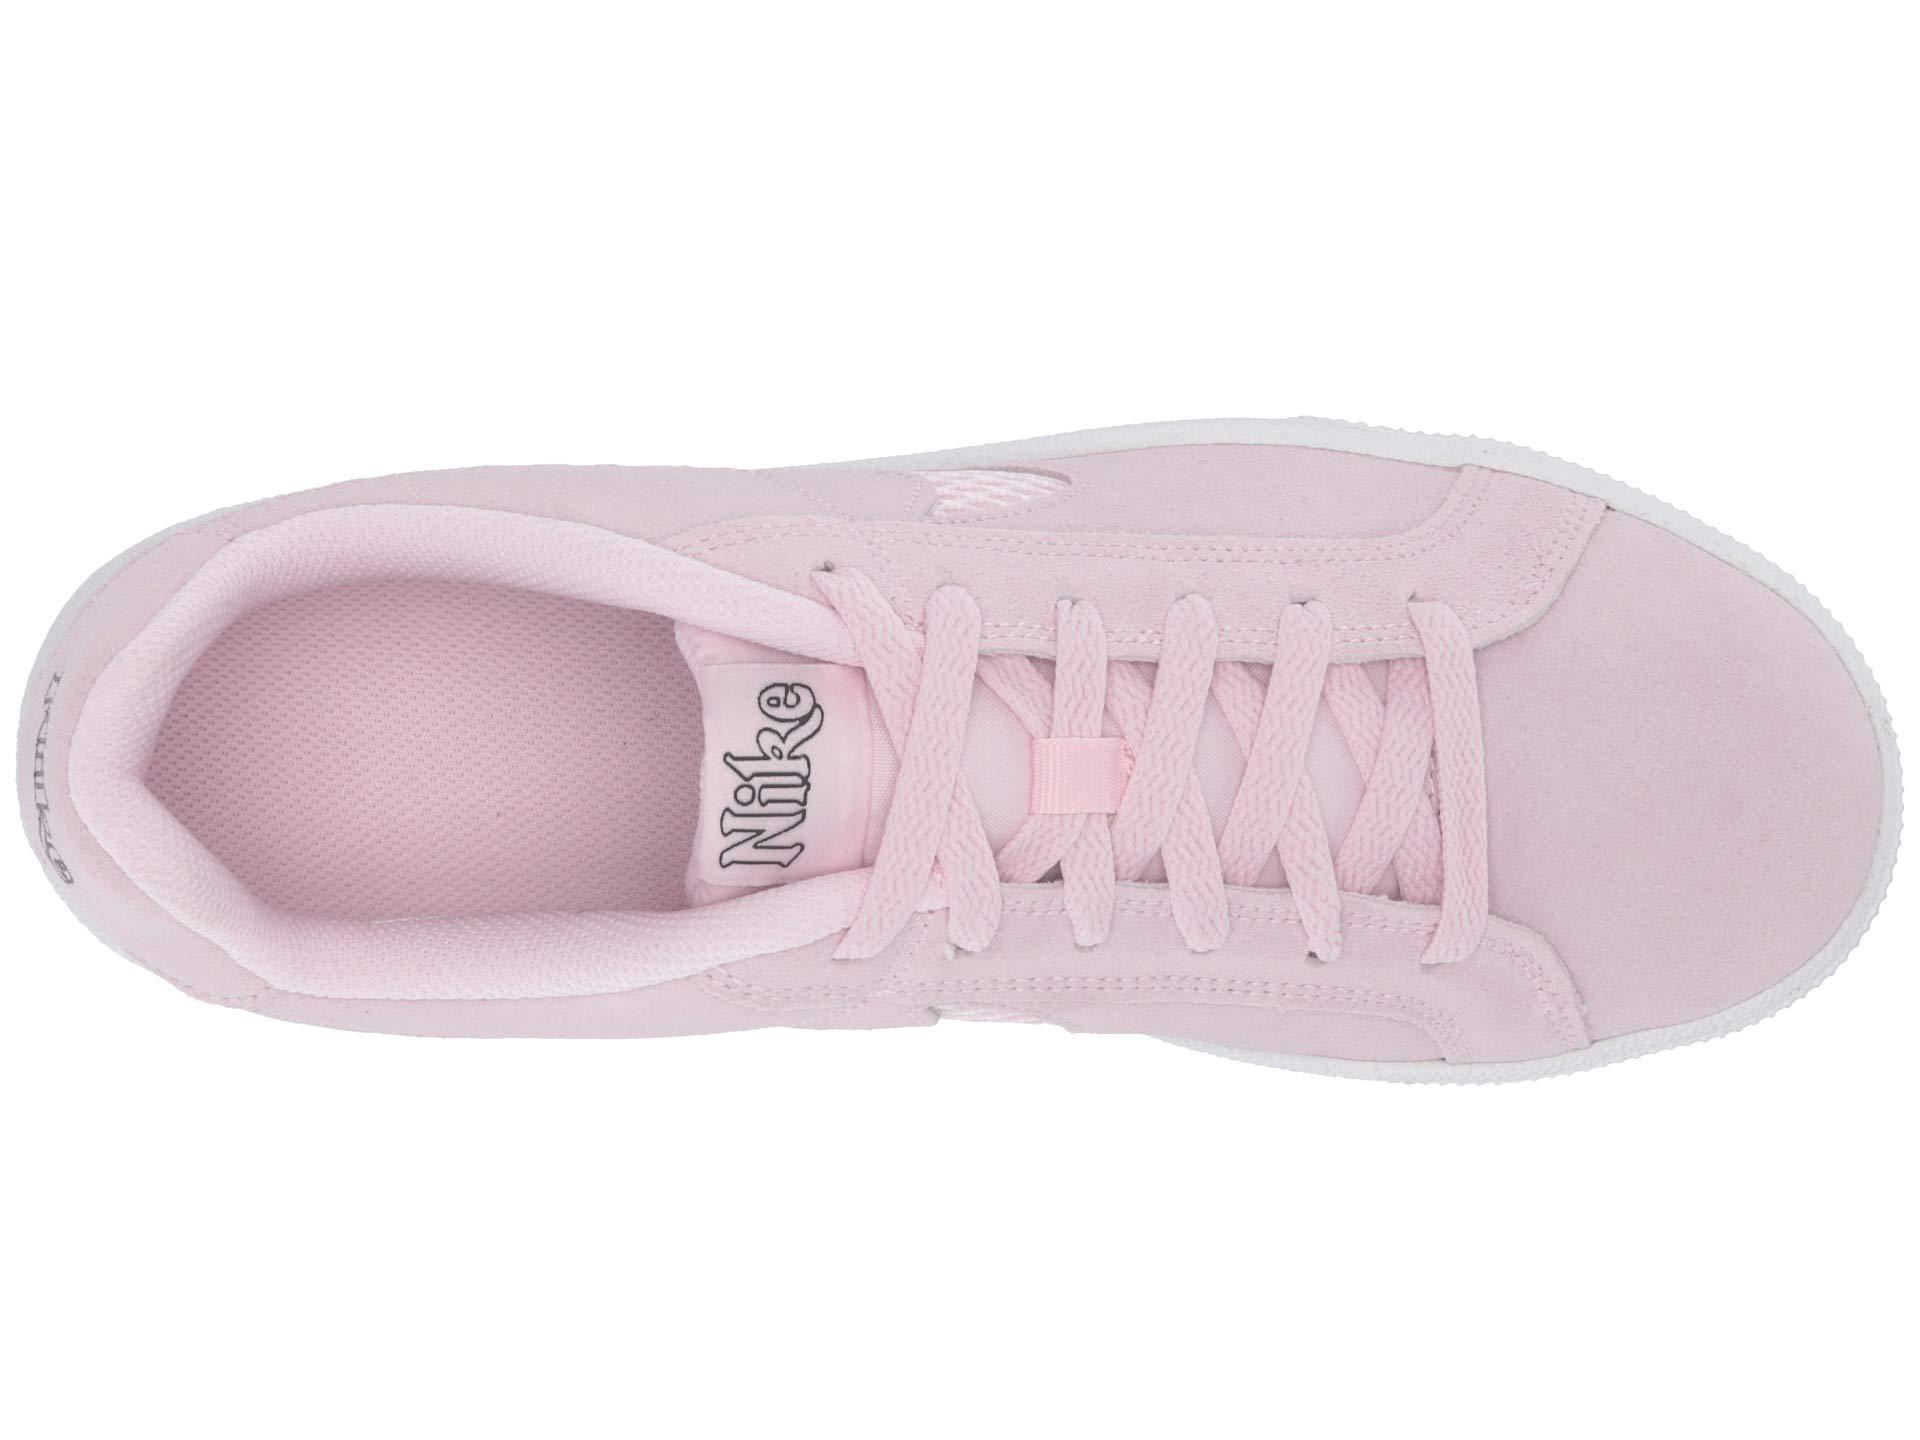 Nike Court Royale Prem Women's Shoes (trainers) In Pink | Lyst